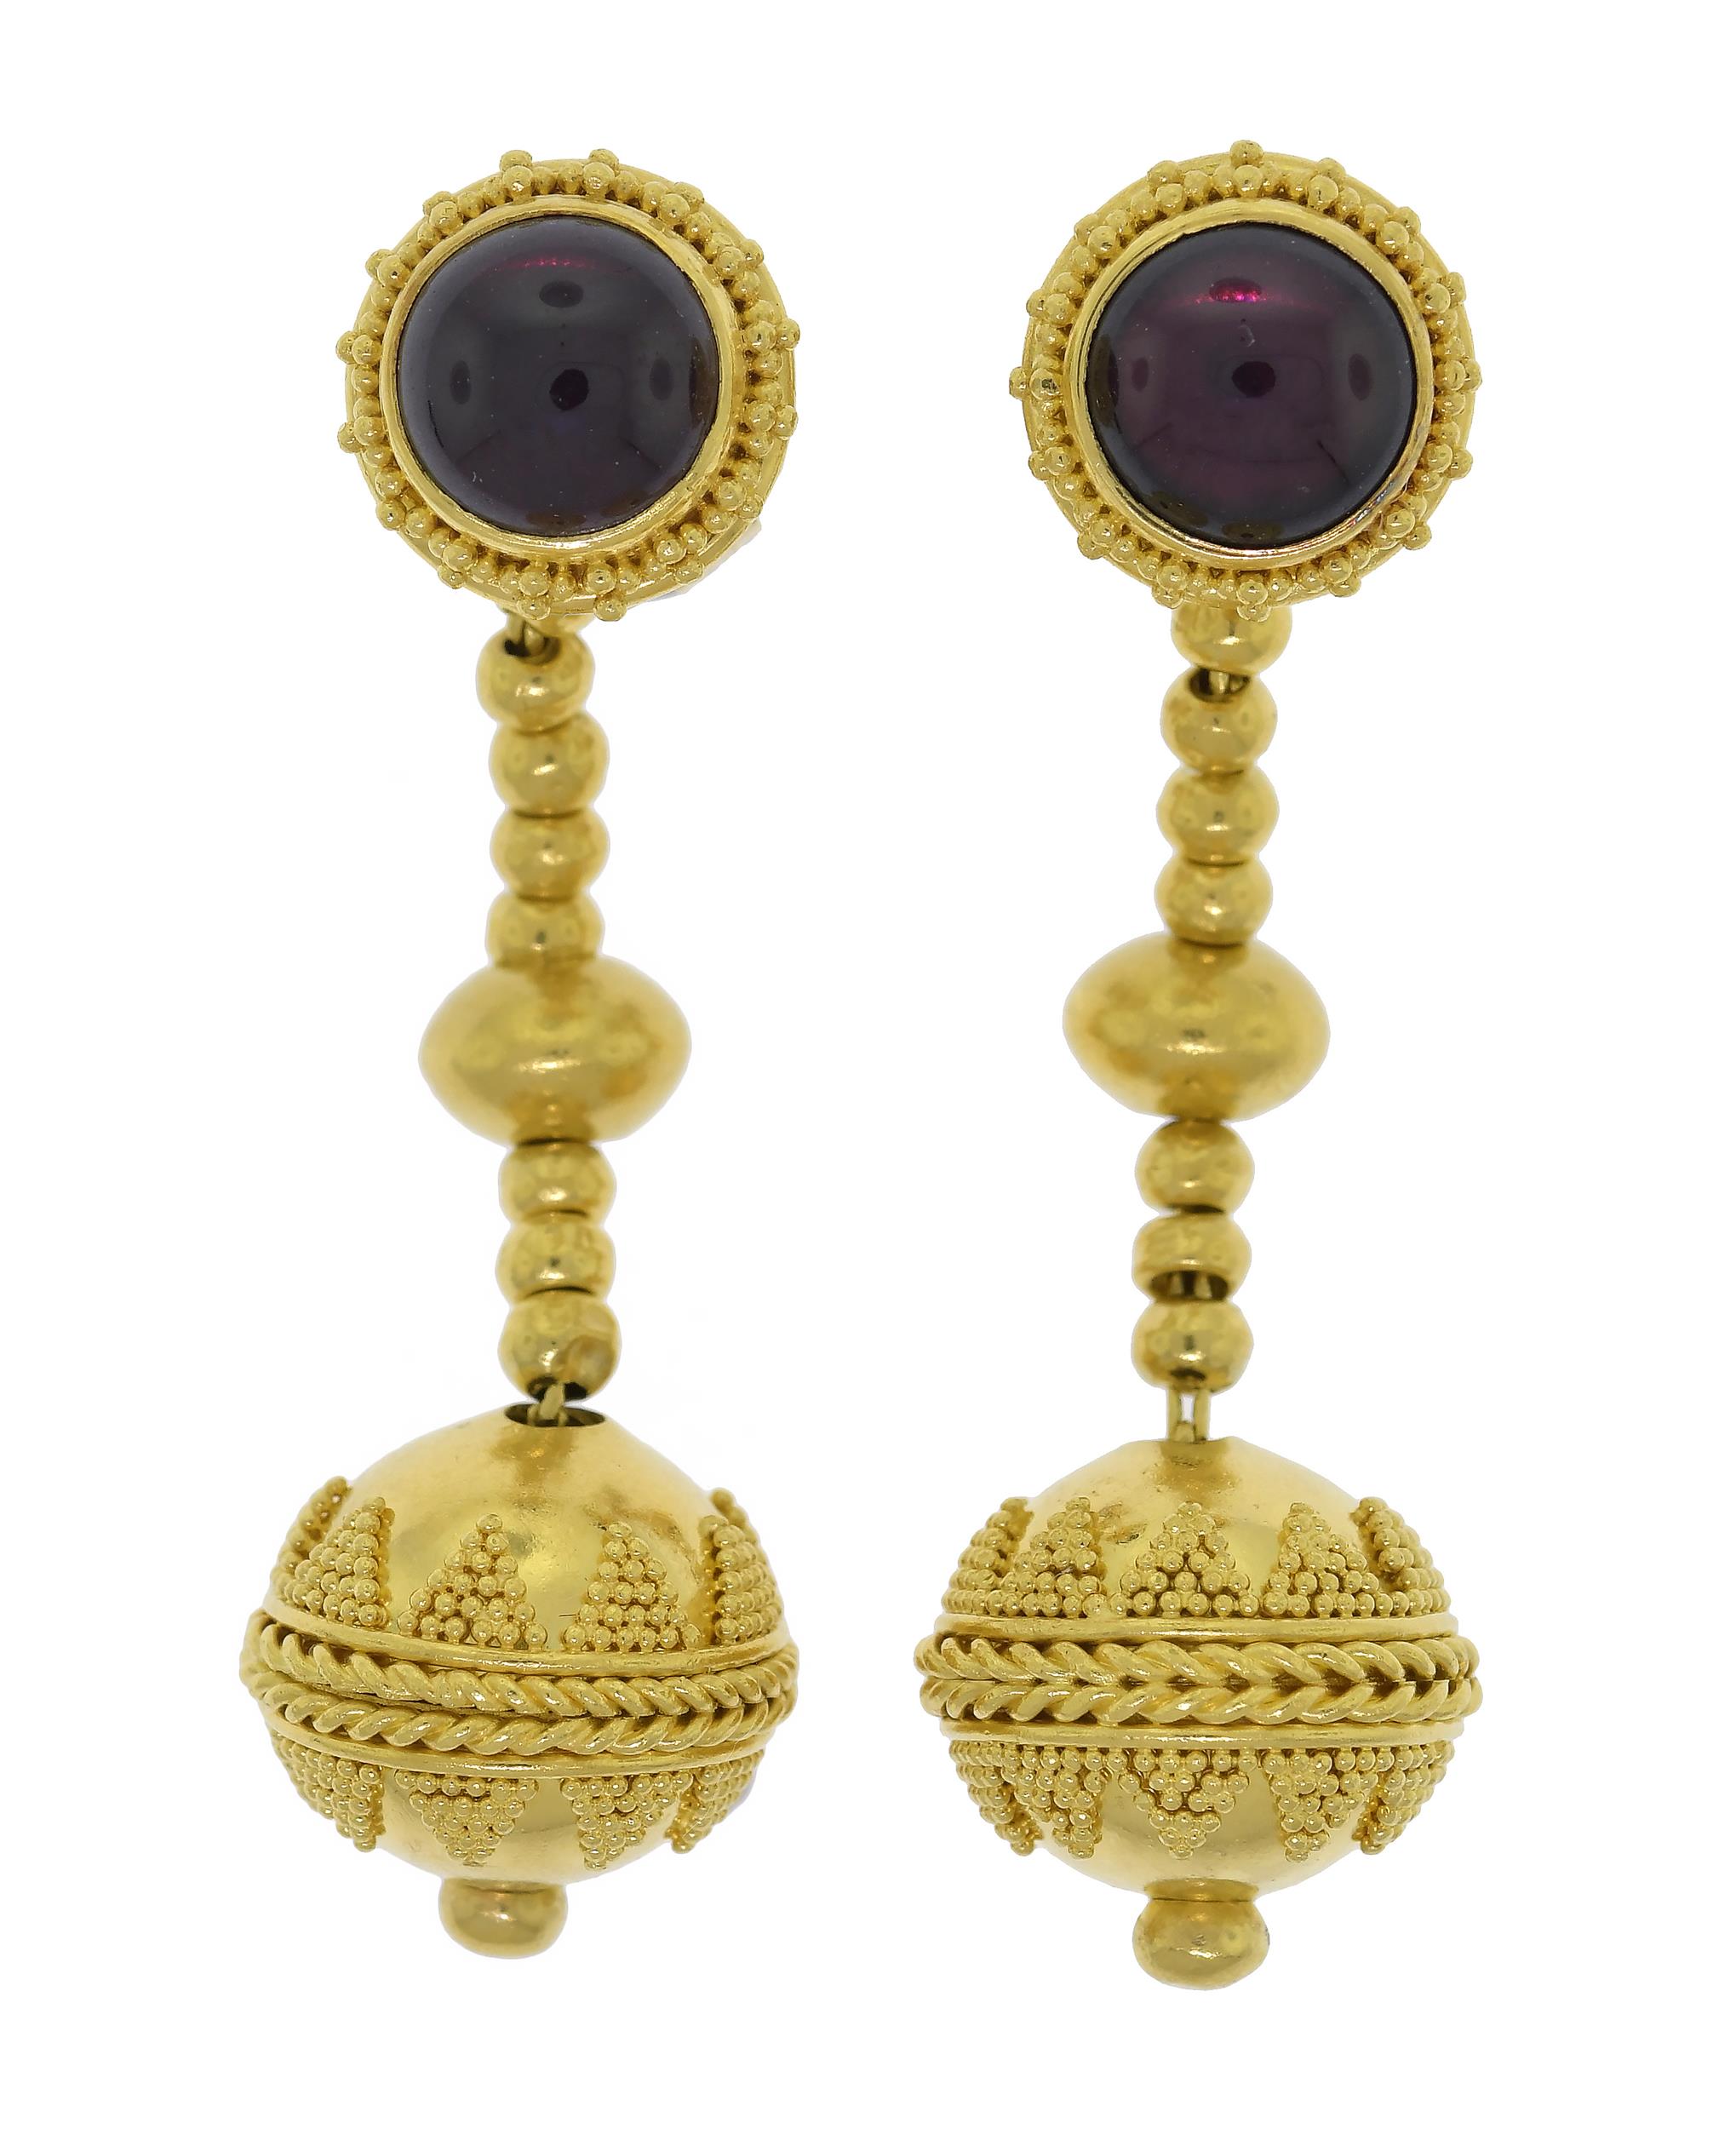 22K GOLD ETRUSCAN STYLE BEADED